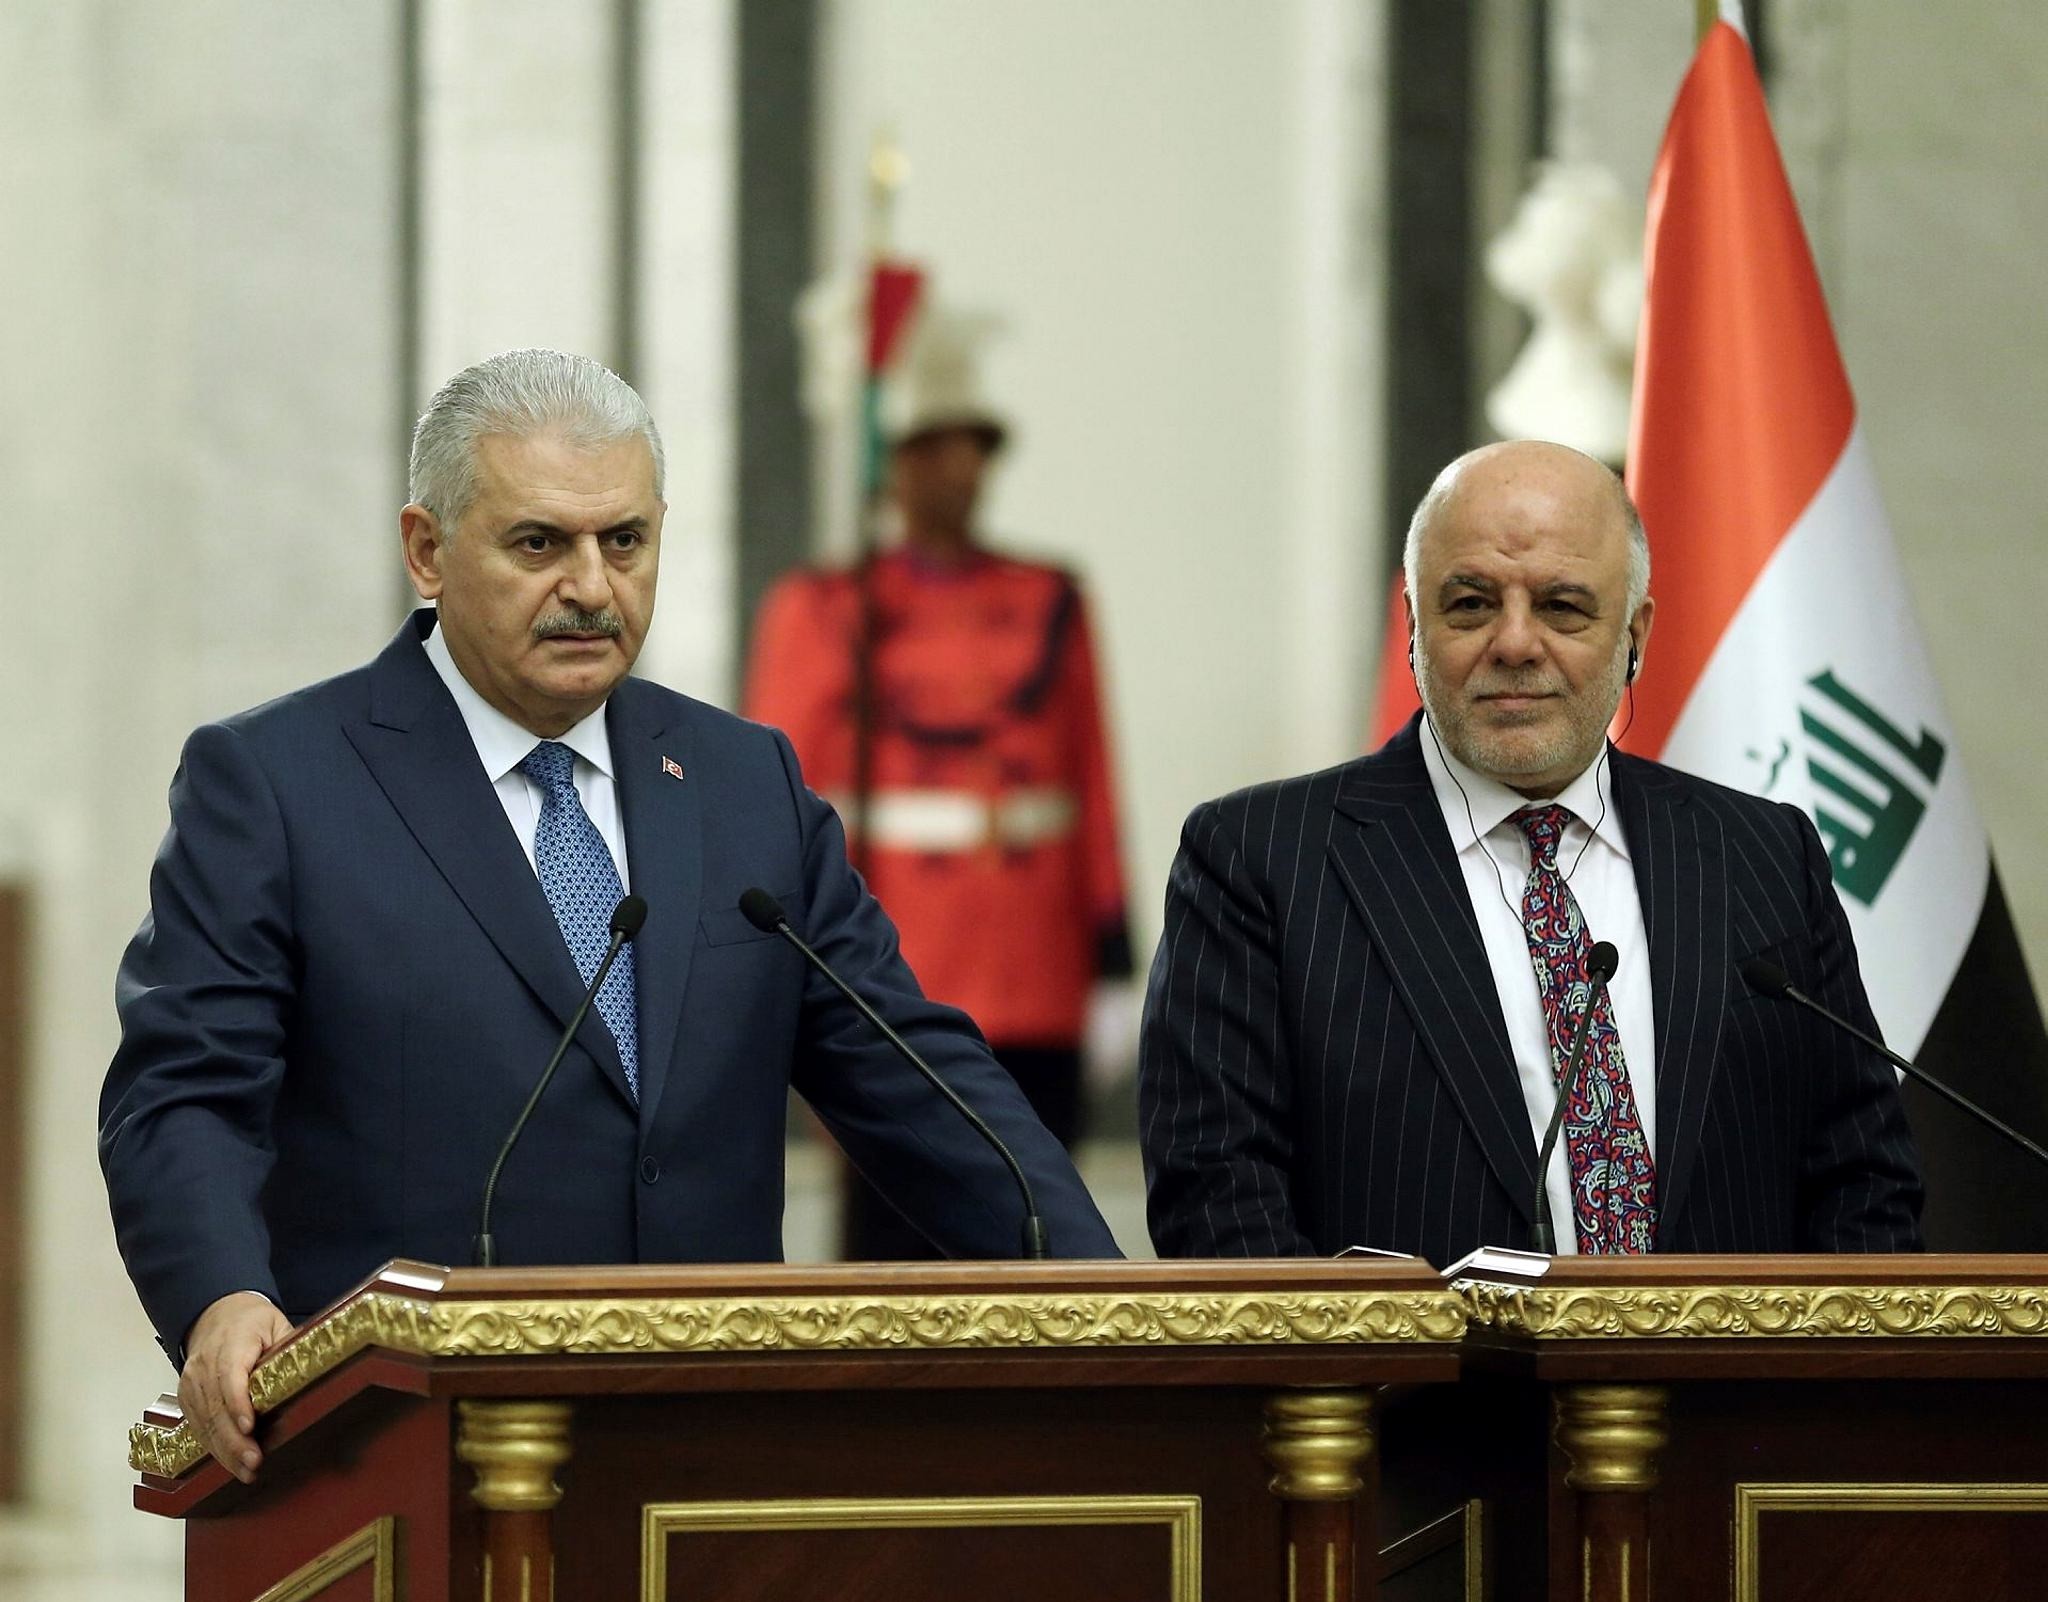 Prime Minister Yu0131ldu0131ru0131m over the weekend met with his Iraq counterpart, Haider al-Abadi, during his visit to Baghdad to discuss security issues, especially the continued PKK presence in the country.